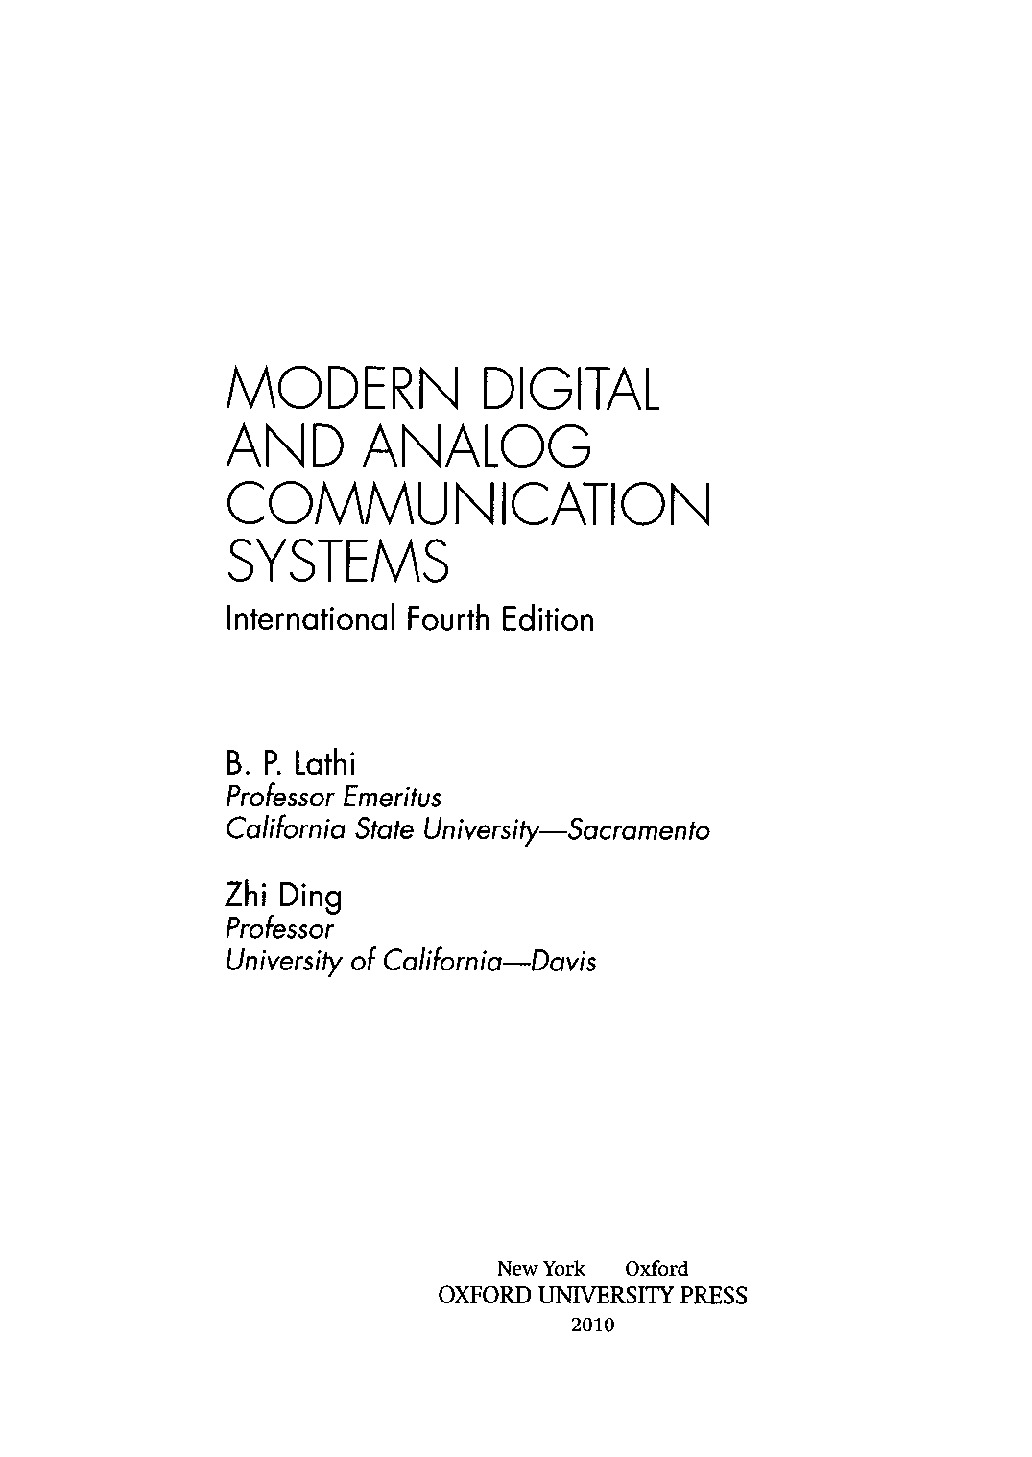 Book-Modern-Digital-And-Analog-Communication-Systems-4th-edition-by-Lathi